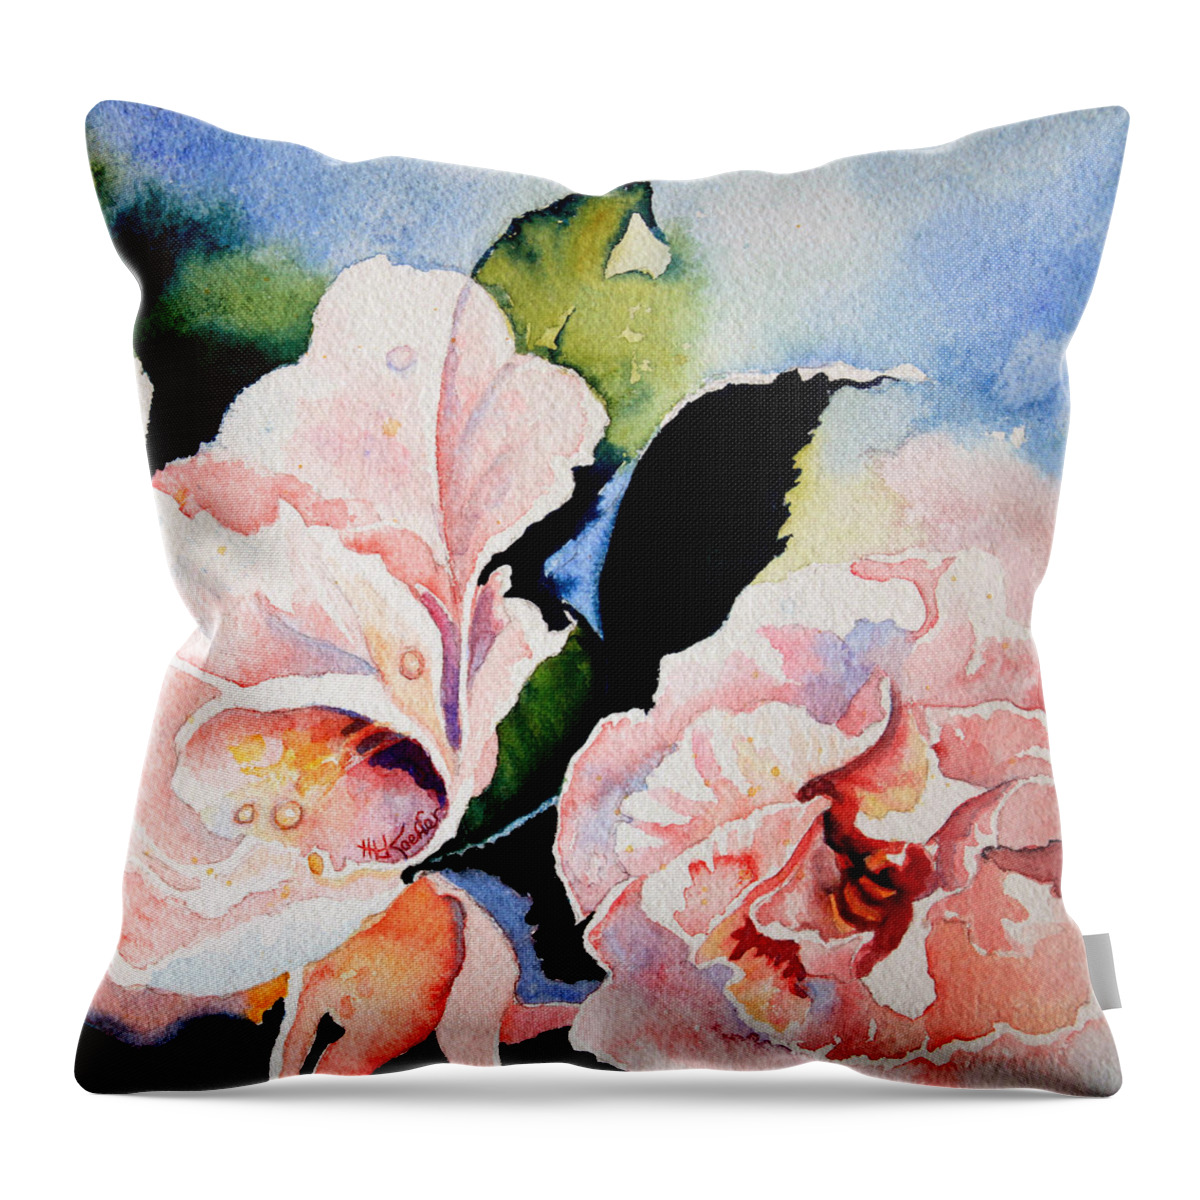 Rose Garden Throw Pillow featuring the painting Roses 3 by Hanne Lore Koehler